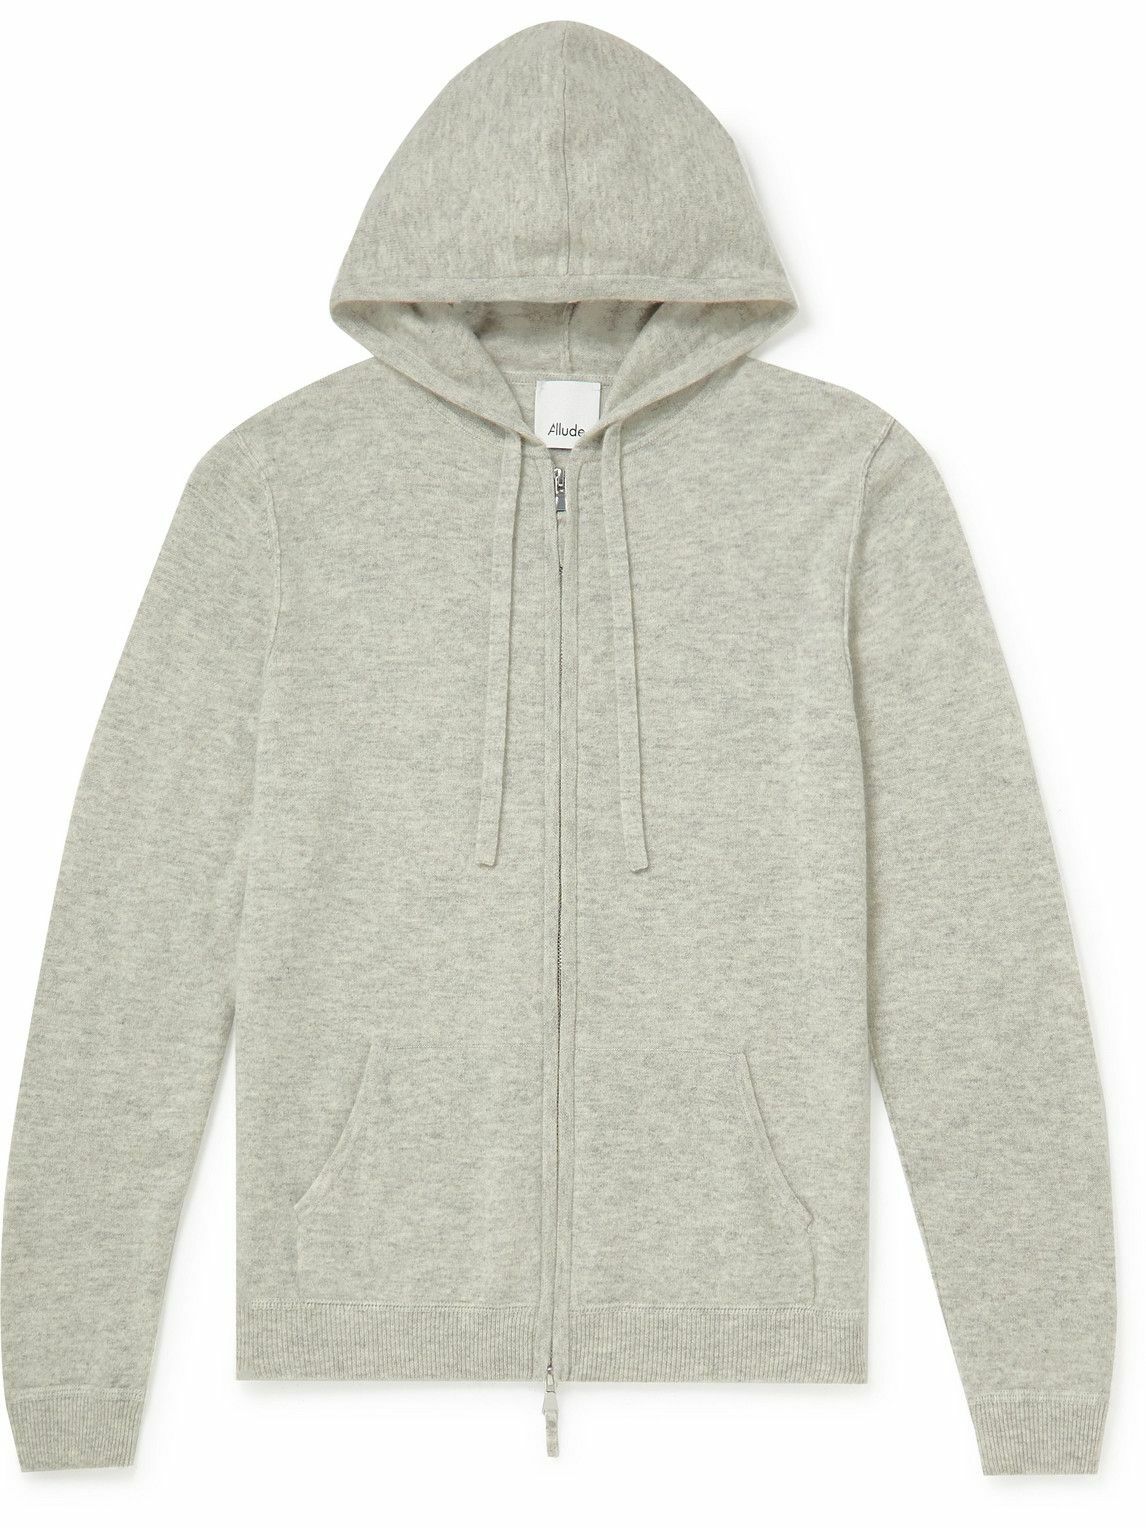 Photo: Allude - Wool and Cashmere-Blend Zip-Up Hoodie - Gray